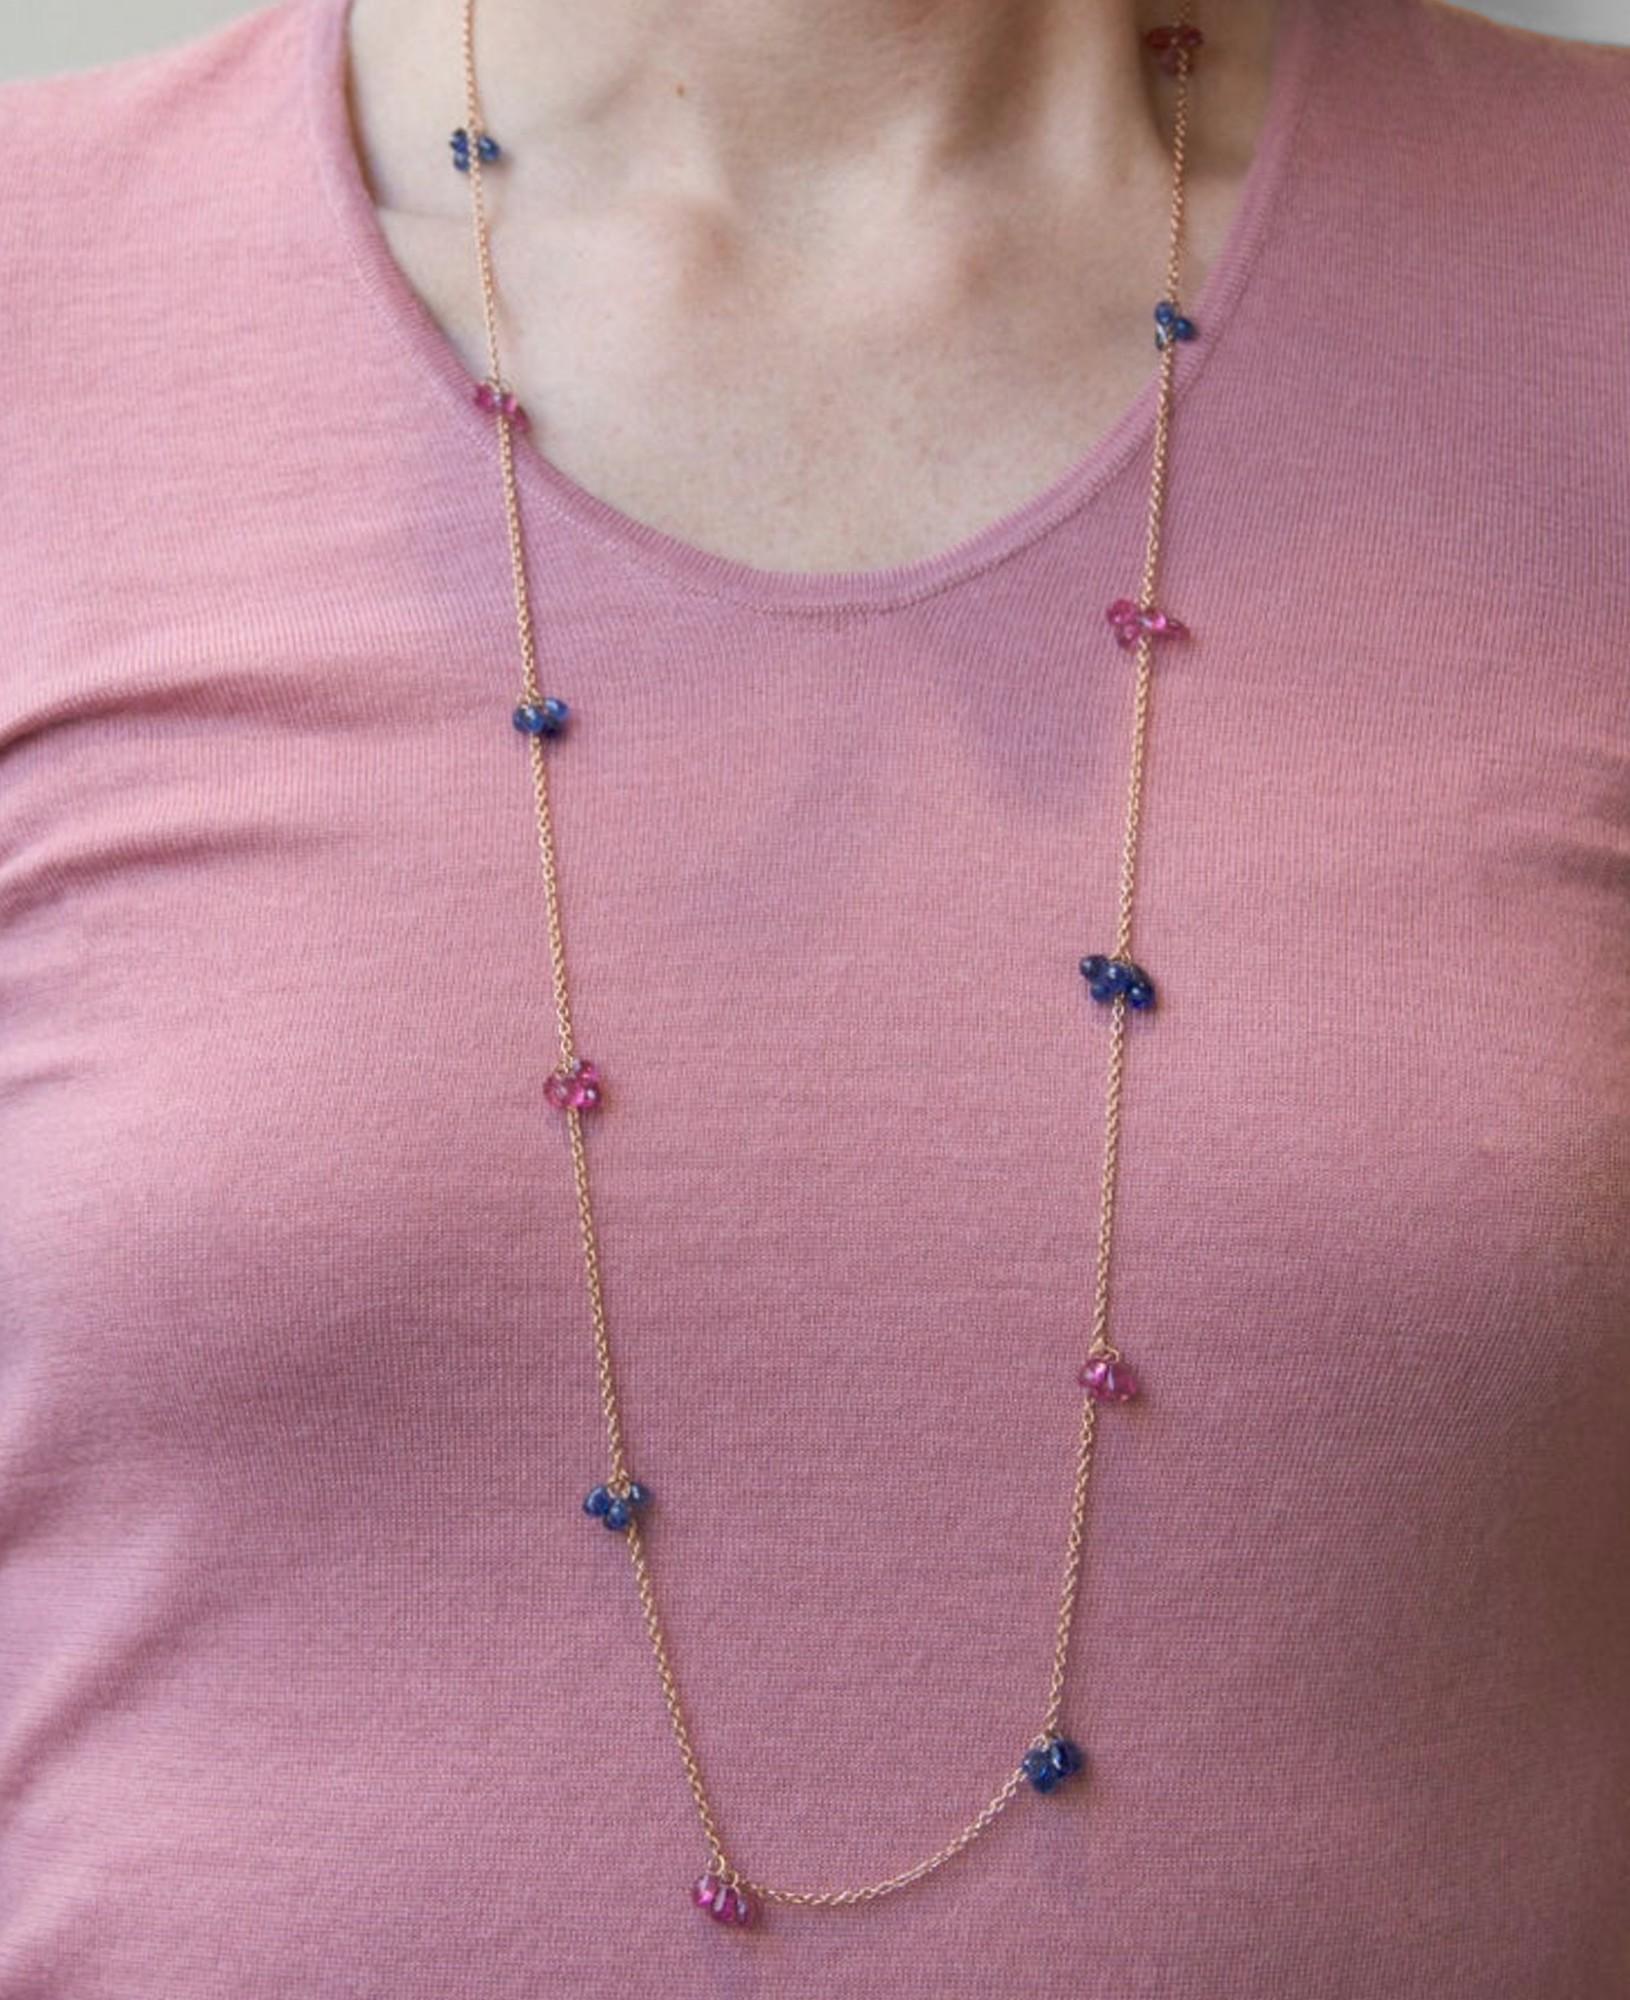 Alex Jona design collection, hand crafted in Italy, 18 karat yellow gold chain necklace (35.43 inch long)  alternating briolette blue sapphire drops and pink tourmaline briolette drops for a total weight of 25.6 carats. 

Alex Jona jewels stand out,